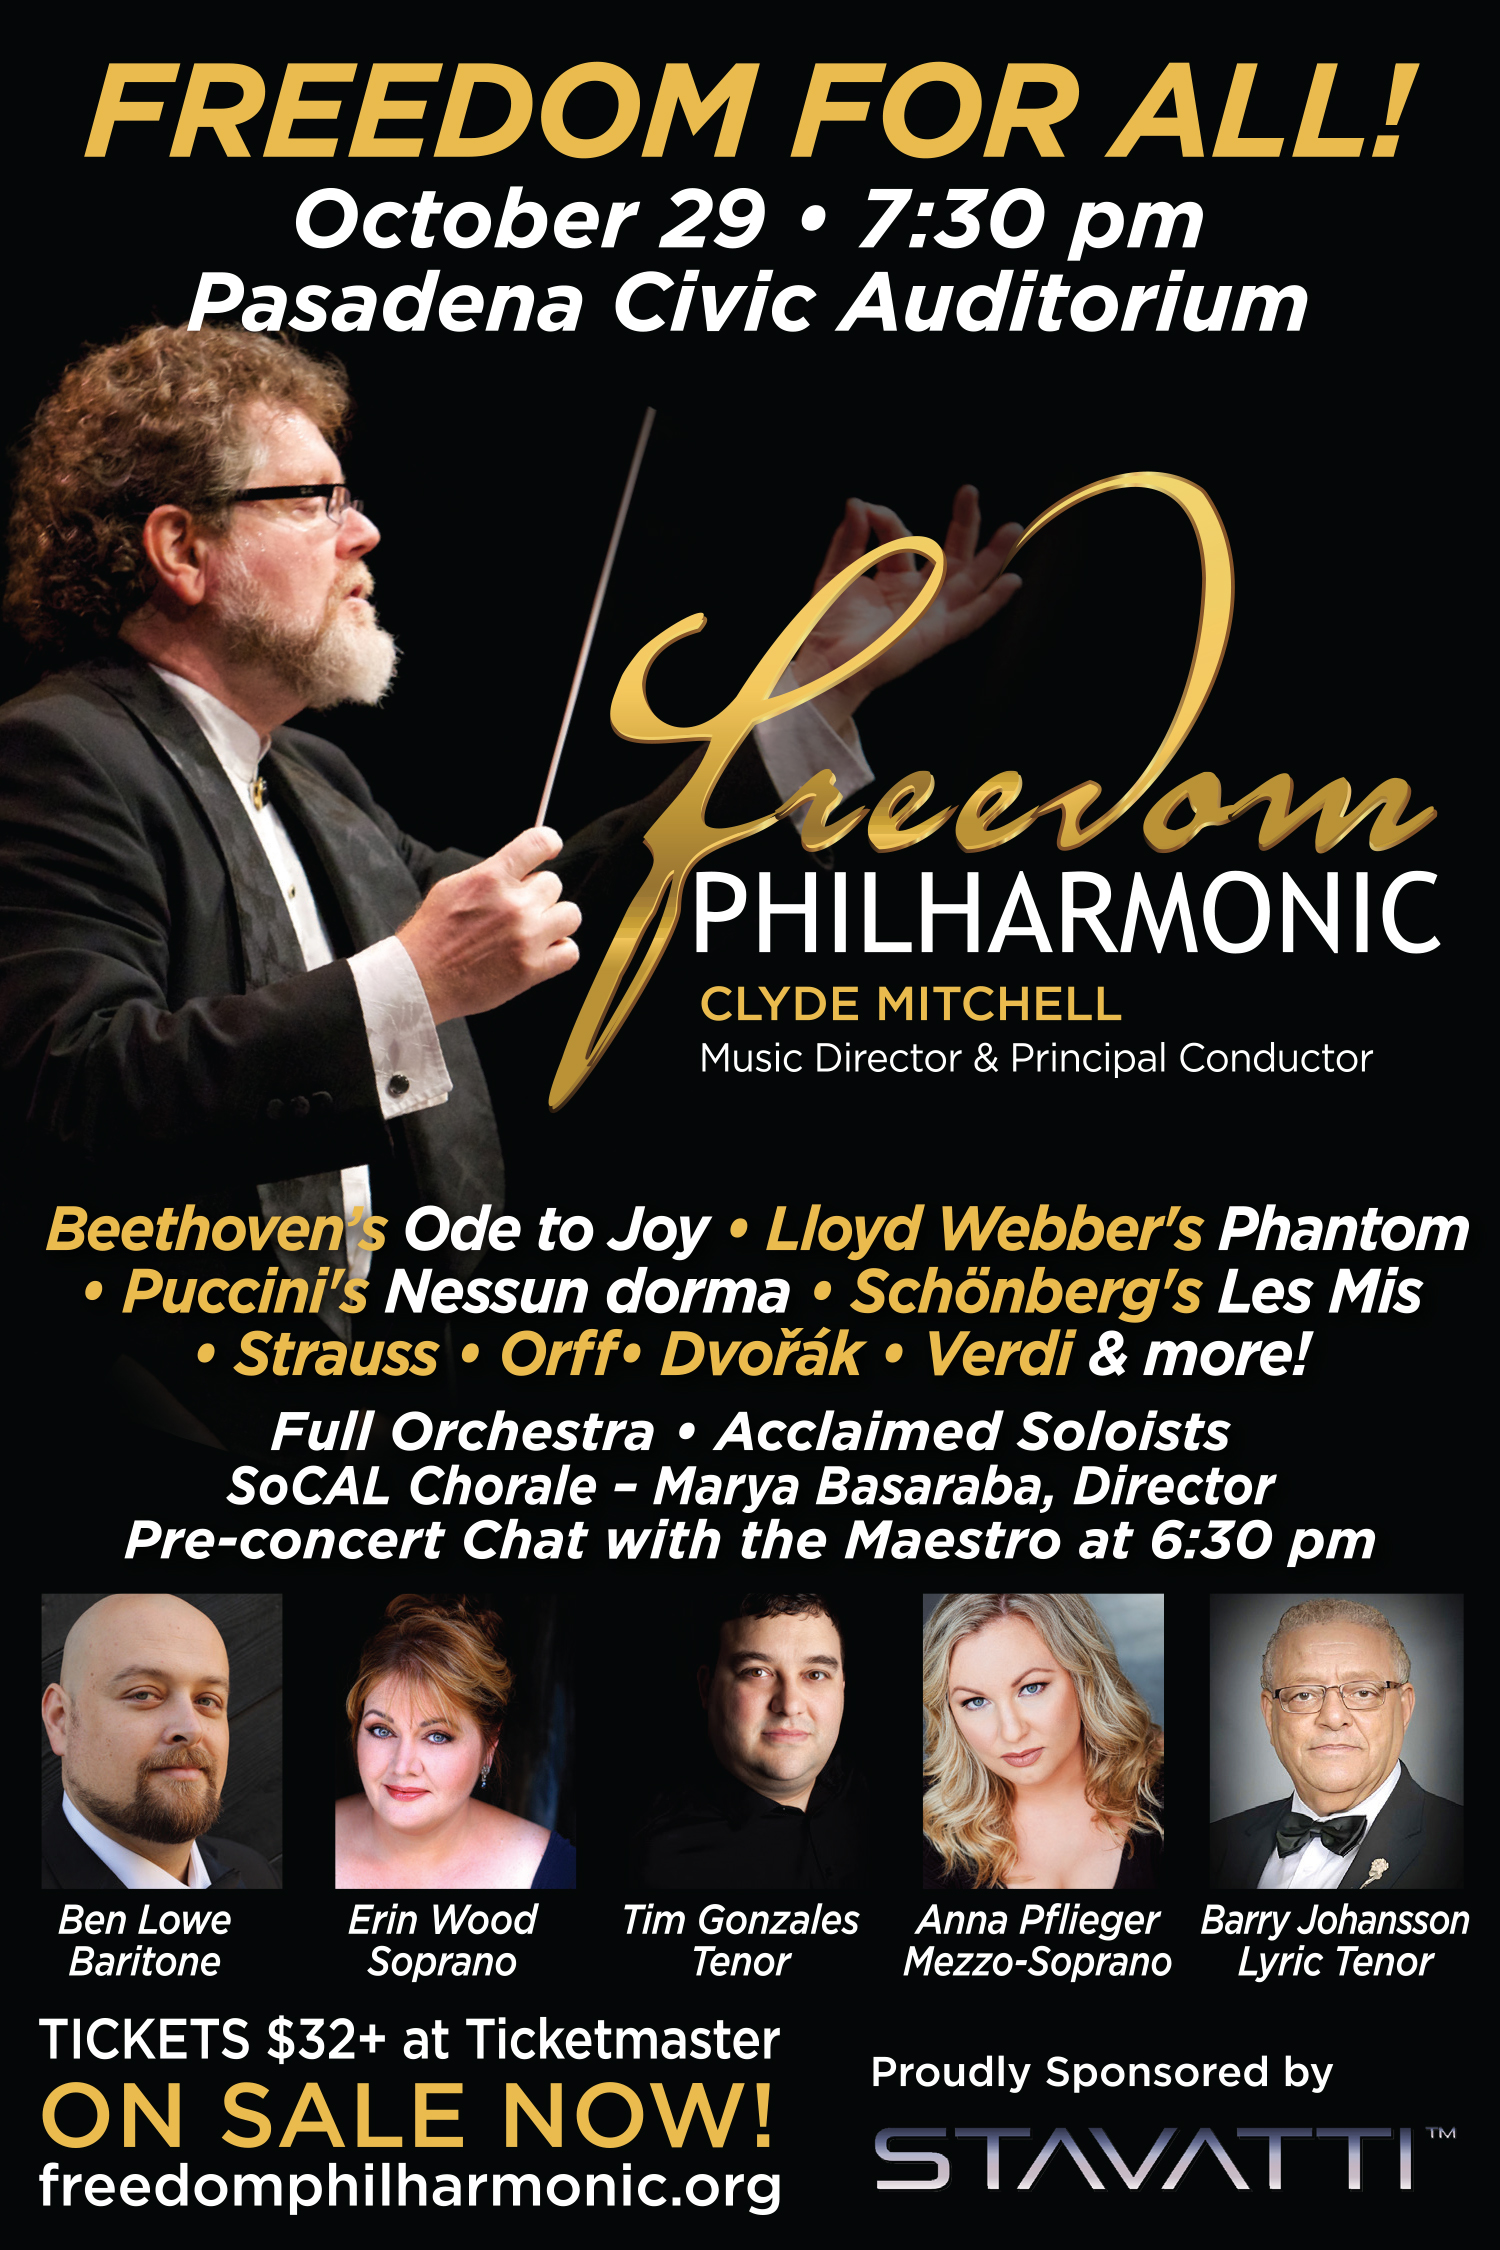 Freedom Philharmonic poster showing man conducting an orchestra